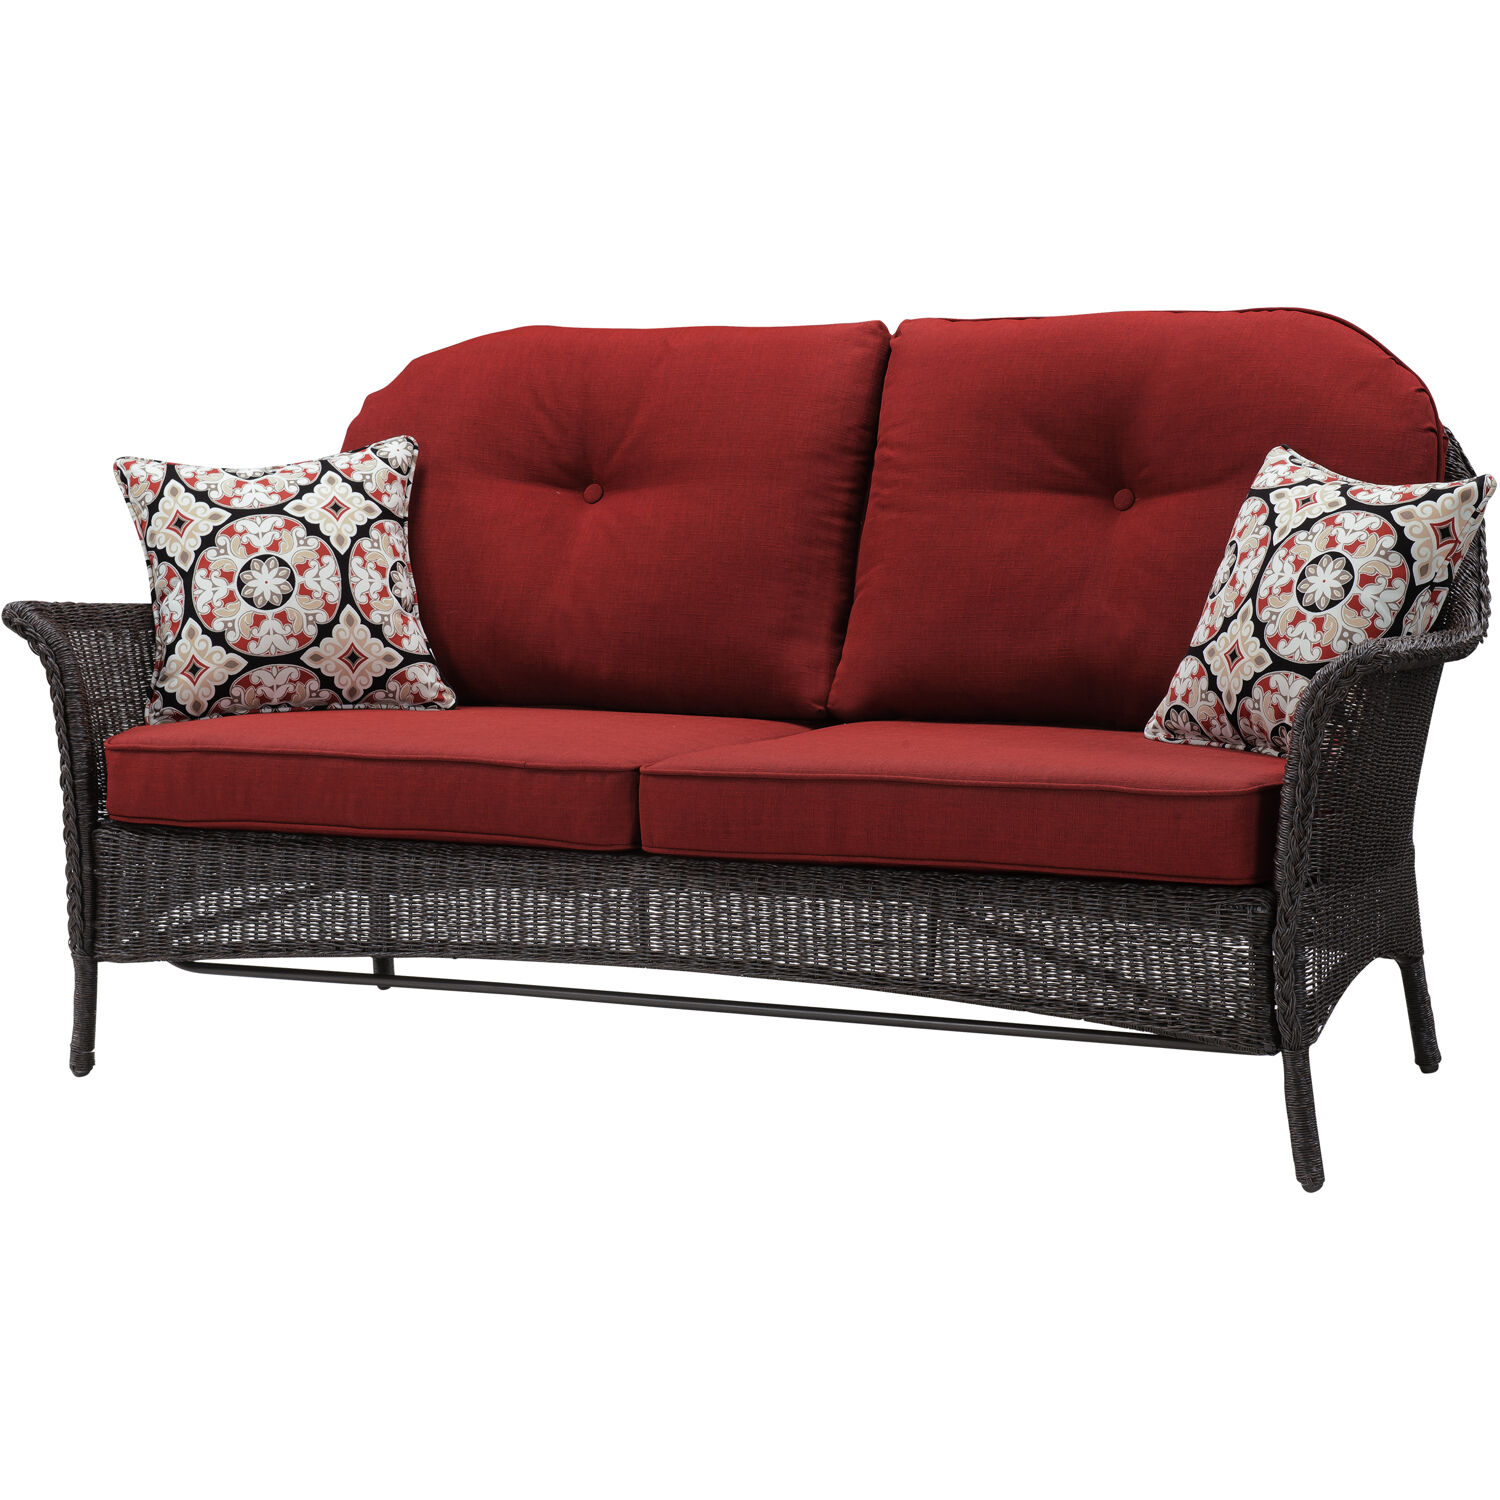 Hanover Sun Porch 4-Piece Resin Lounge Set with Handwoven Loveseat, 2 Armchairs, Coffee Table, and Plush Crimson Red Cushions - image 2 of 10